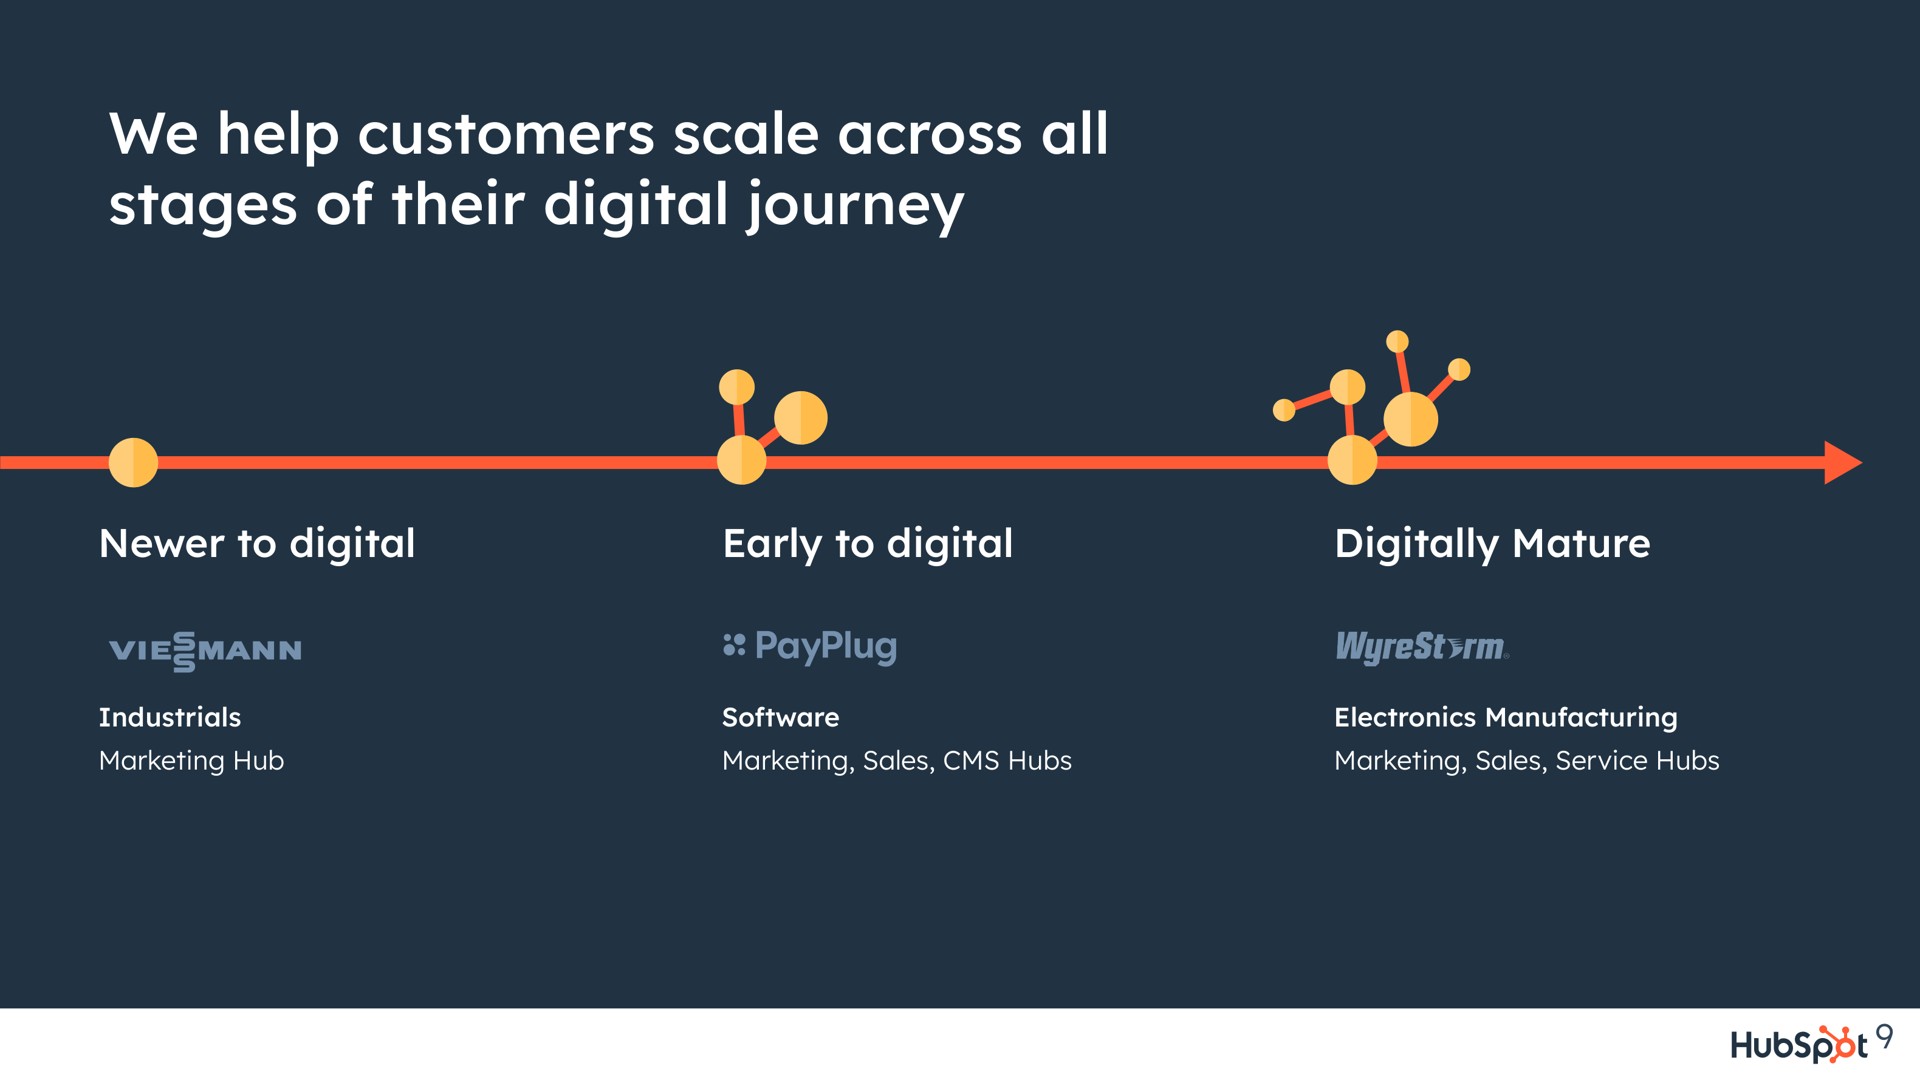 we help customers scale across all stages of their digital journey to early to digitally mature | Hubspot